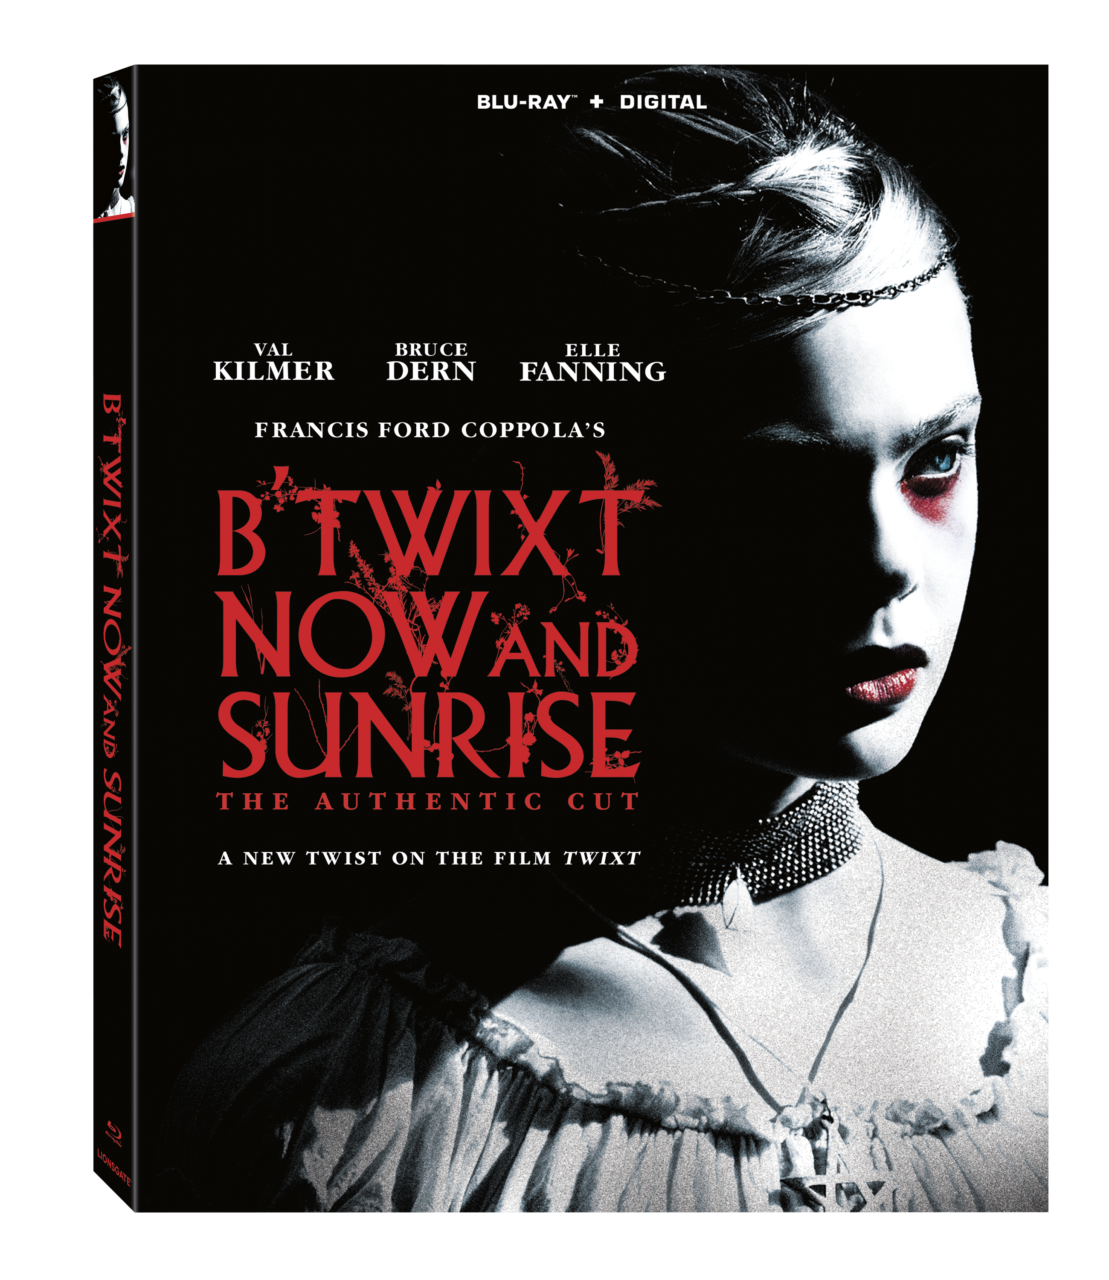 B'Twixt Now And Sunrise The Authentic Cut Blu-Ray Combo Pack cover (Lionsgate)